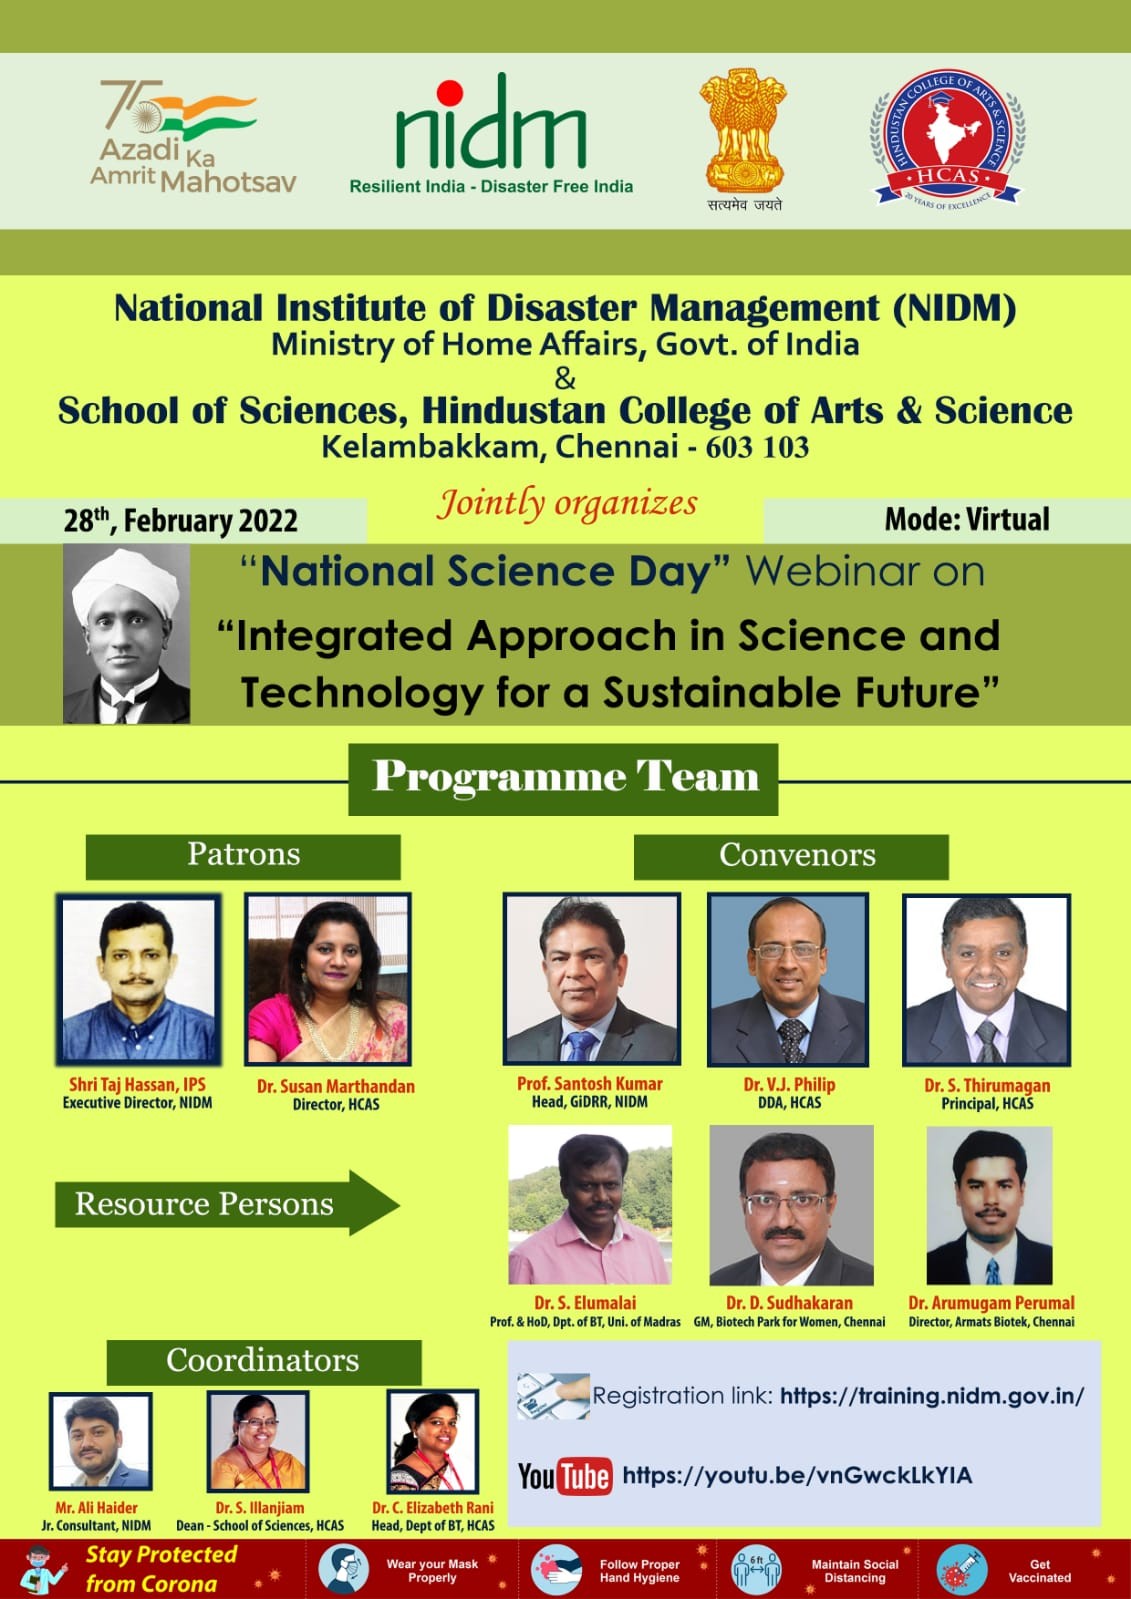 NATIONAL SCIENCE DAY 2022 Integrated Approach in Science and Technology for a Sustainable Future